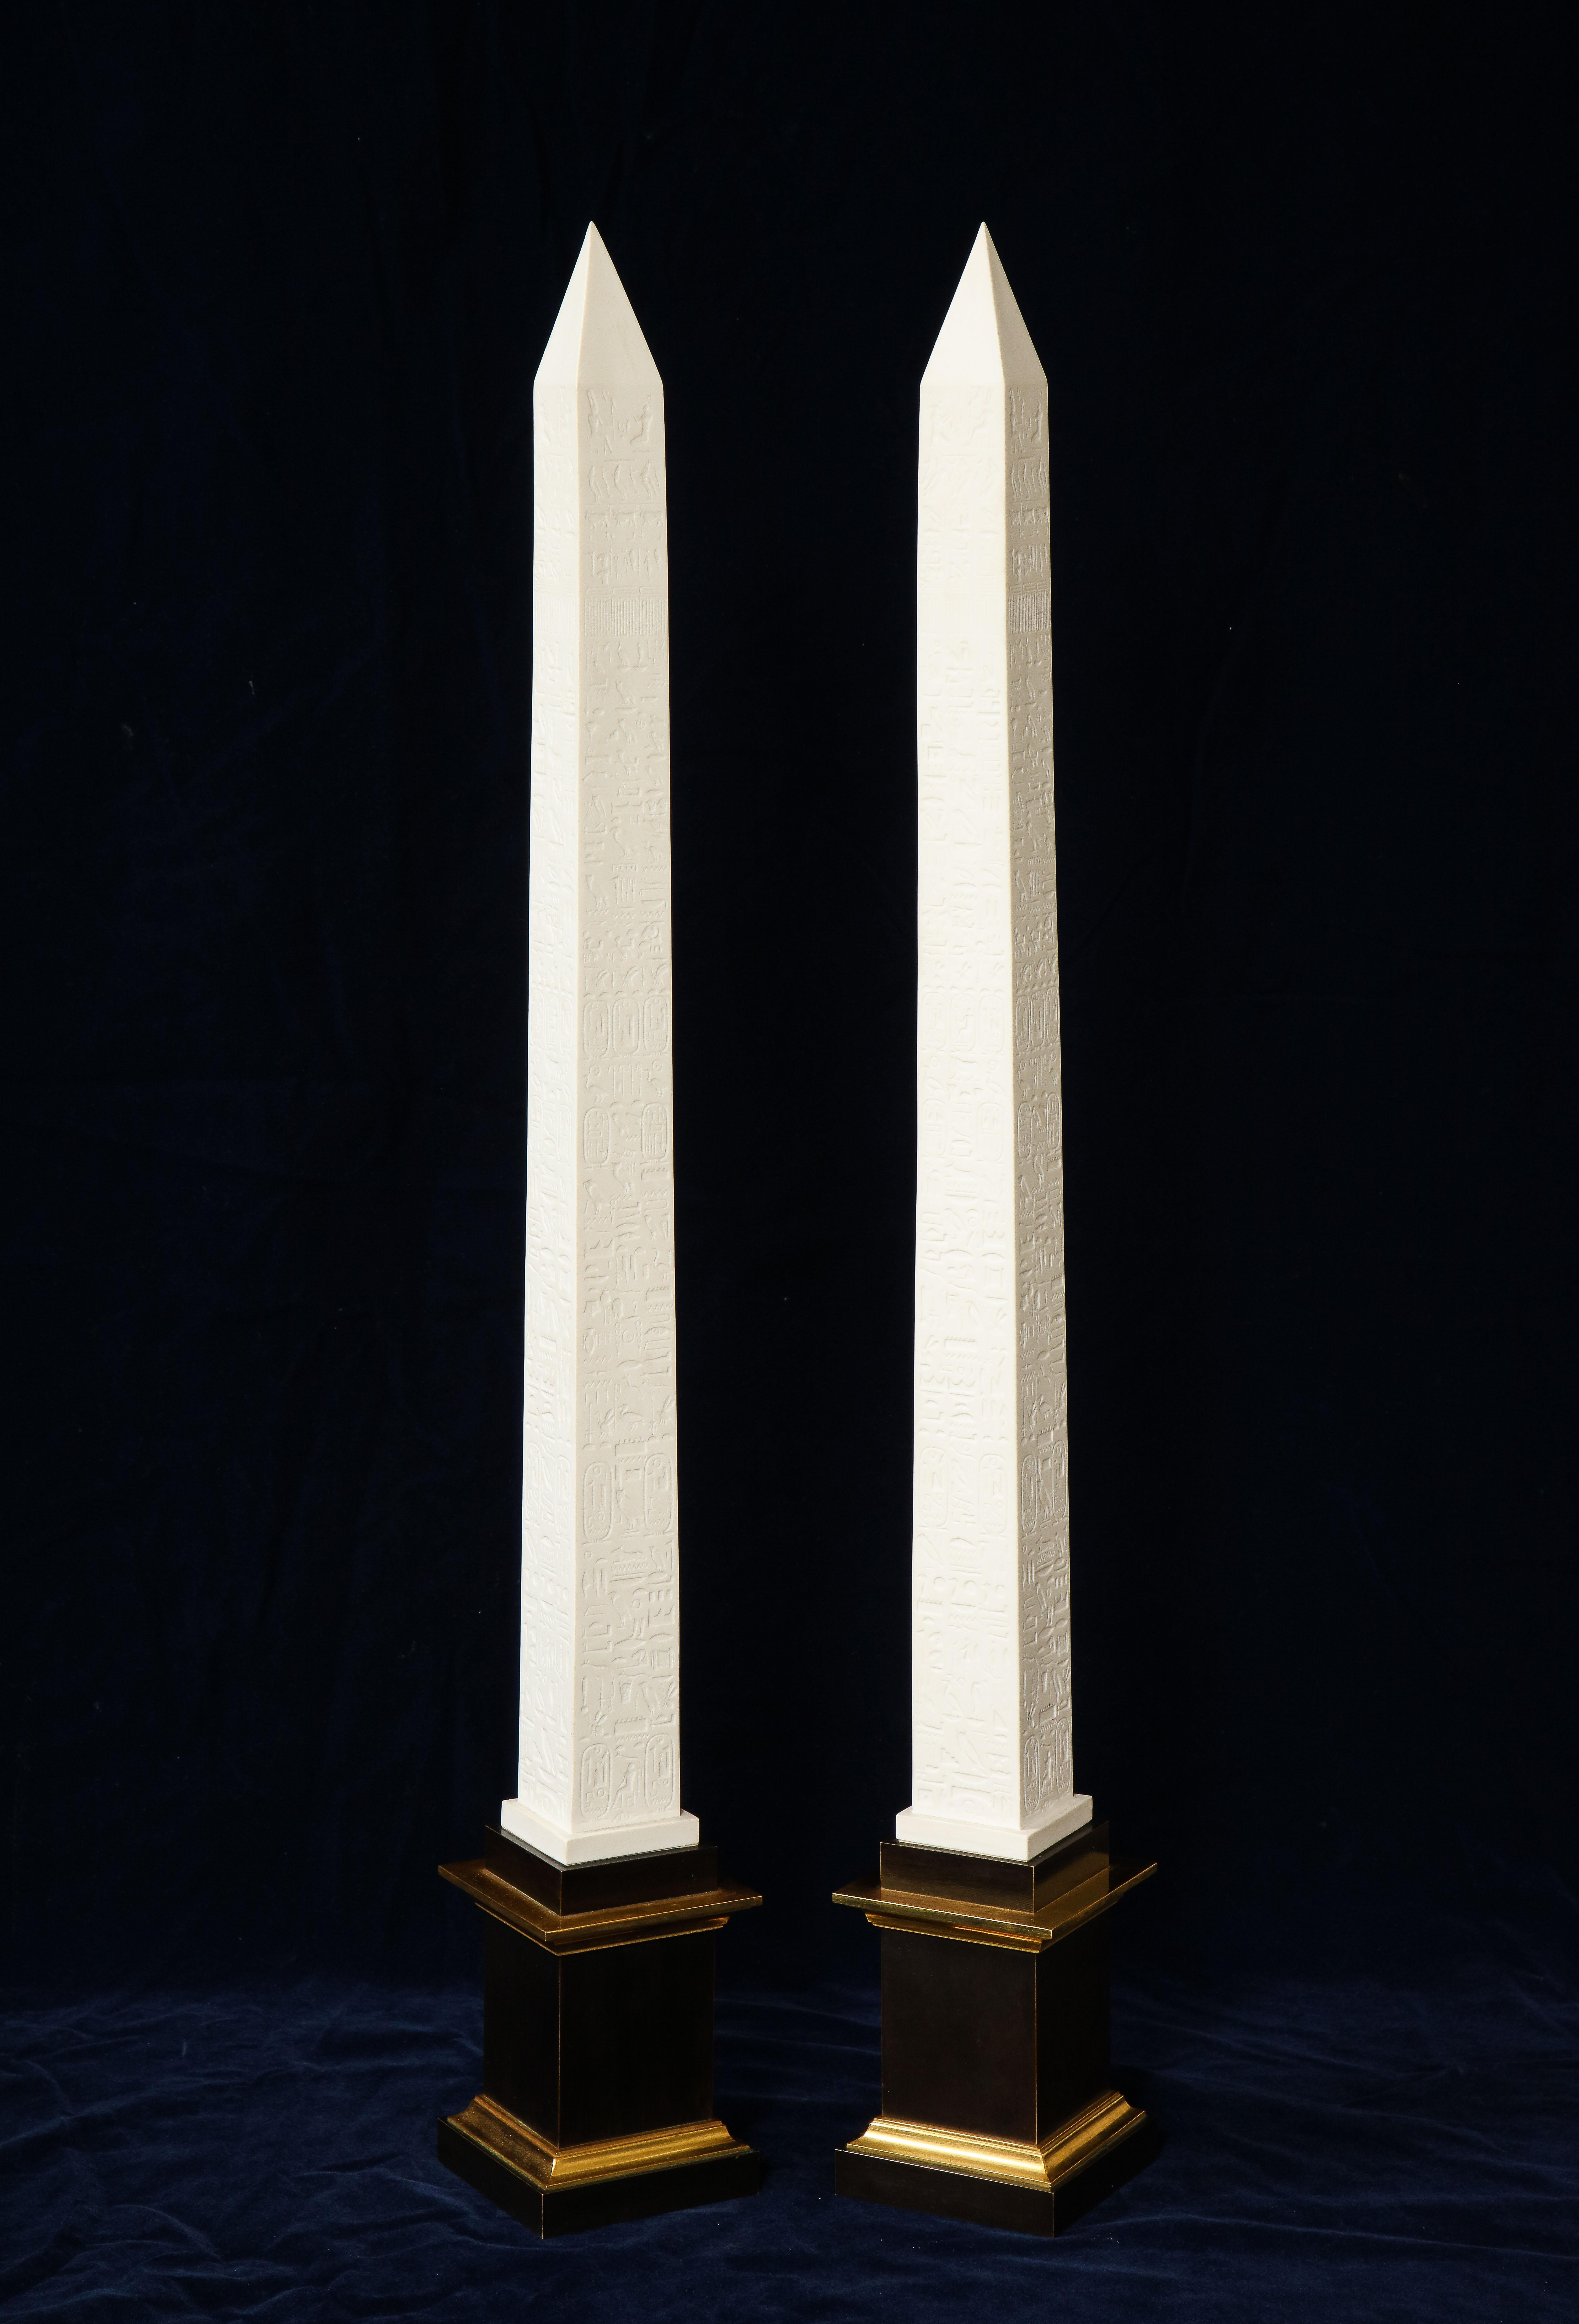 A fabulous and quite unusual pair of original signed and marked Sevres Porcelain patinated and gilt bronze mounted Egyptian Inspired Hyroglifics biscuit Porcelain obelisks. These are truly an amazing pair of Sevres biscuit Porcelain obelisks. It is